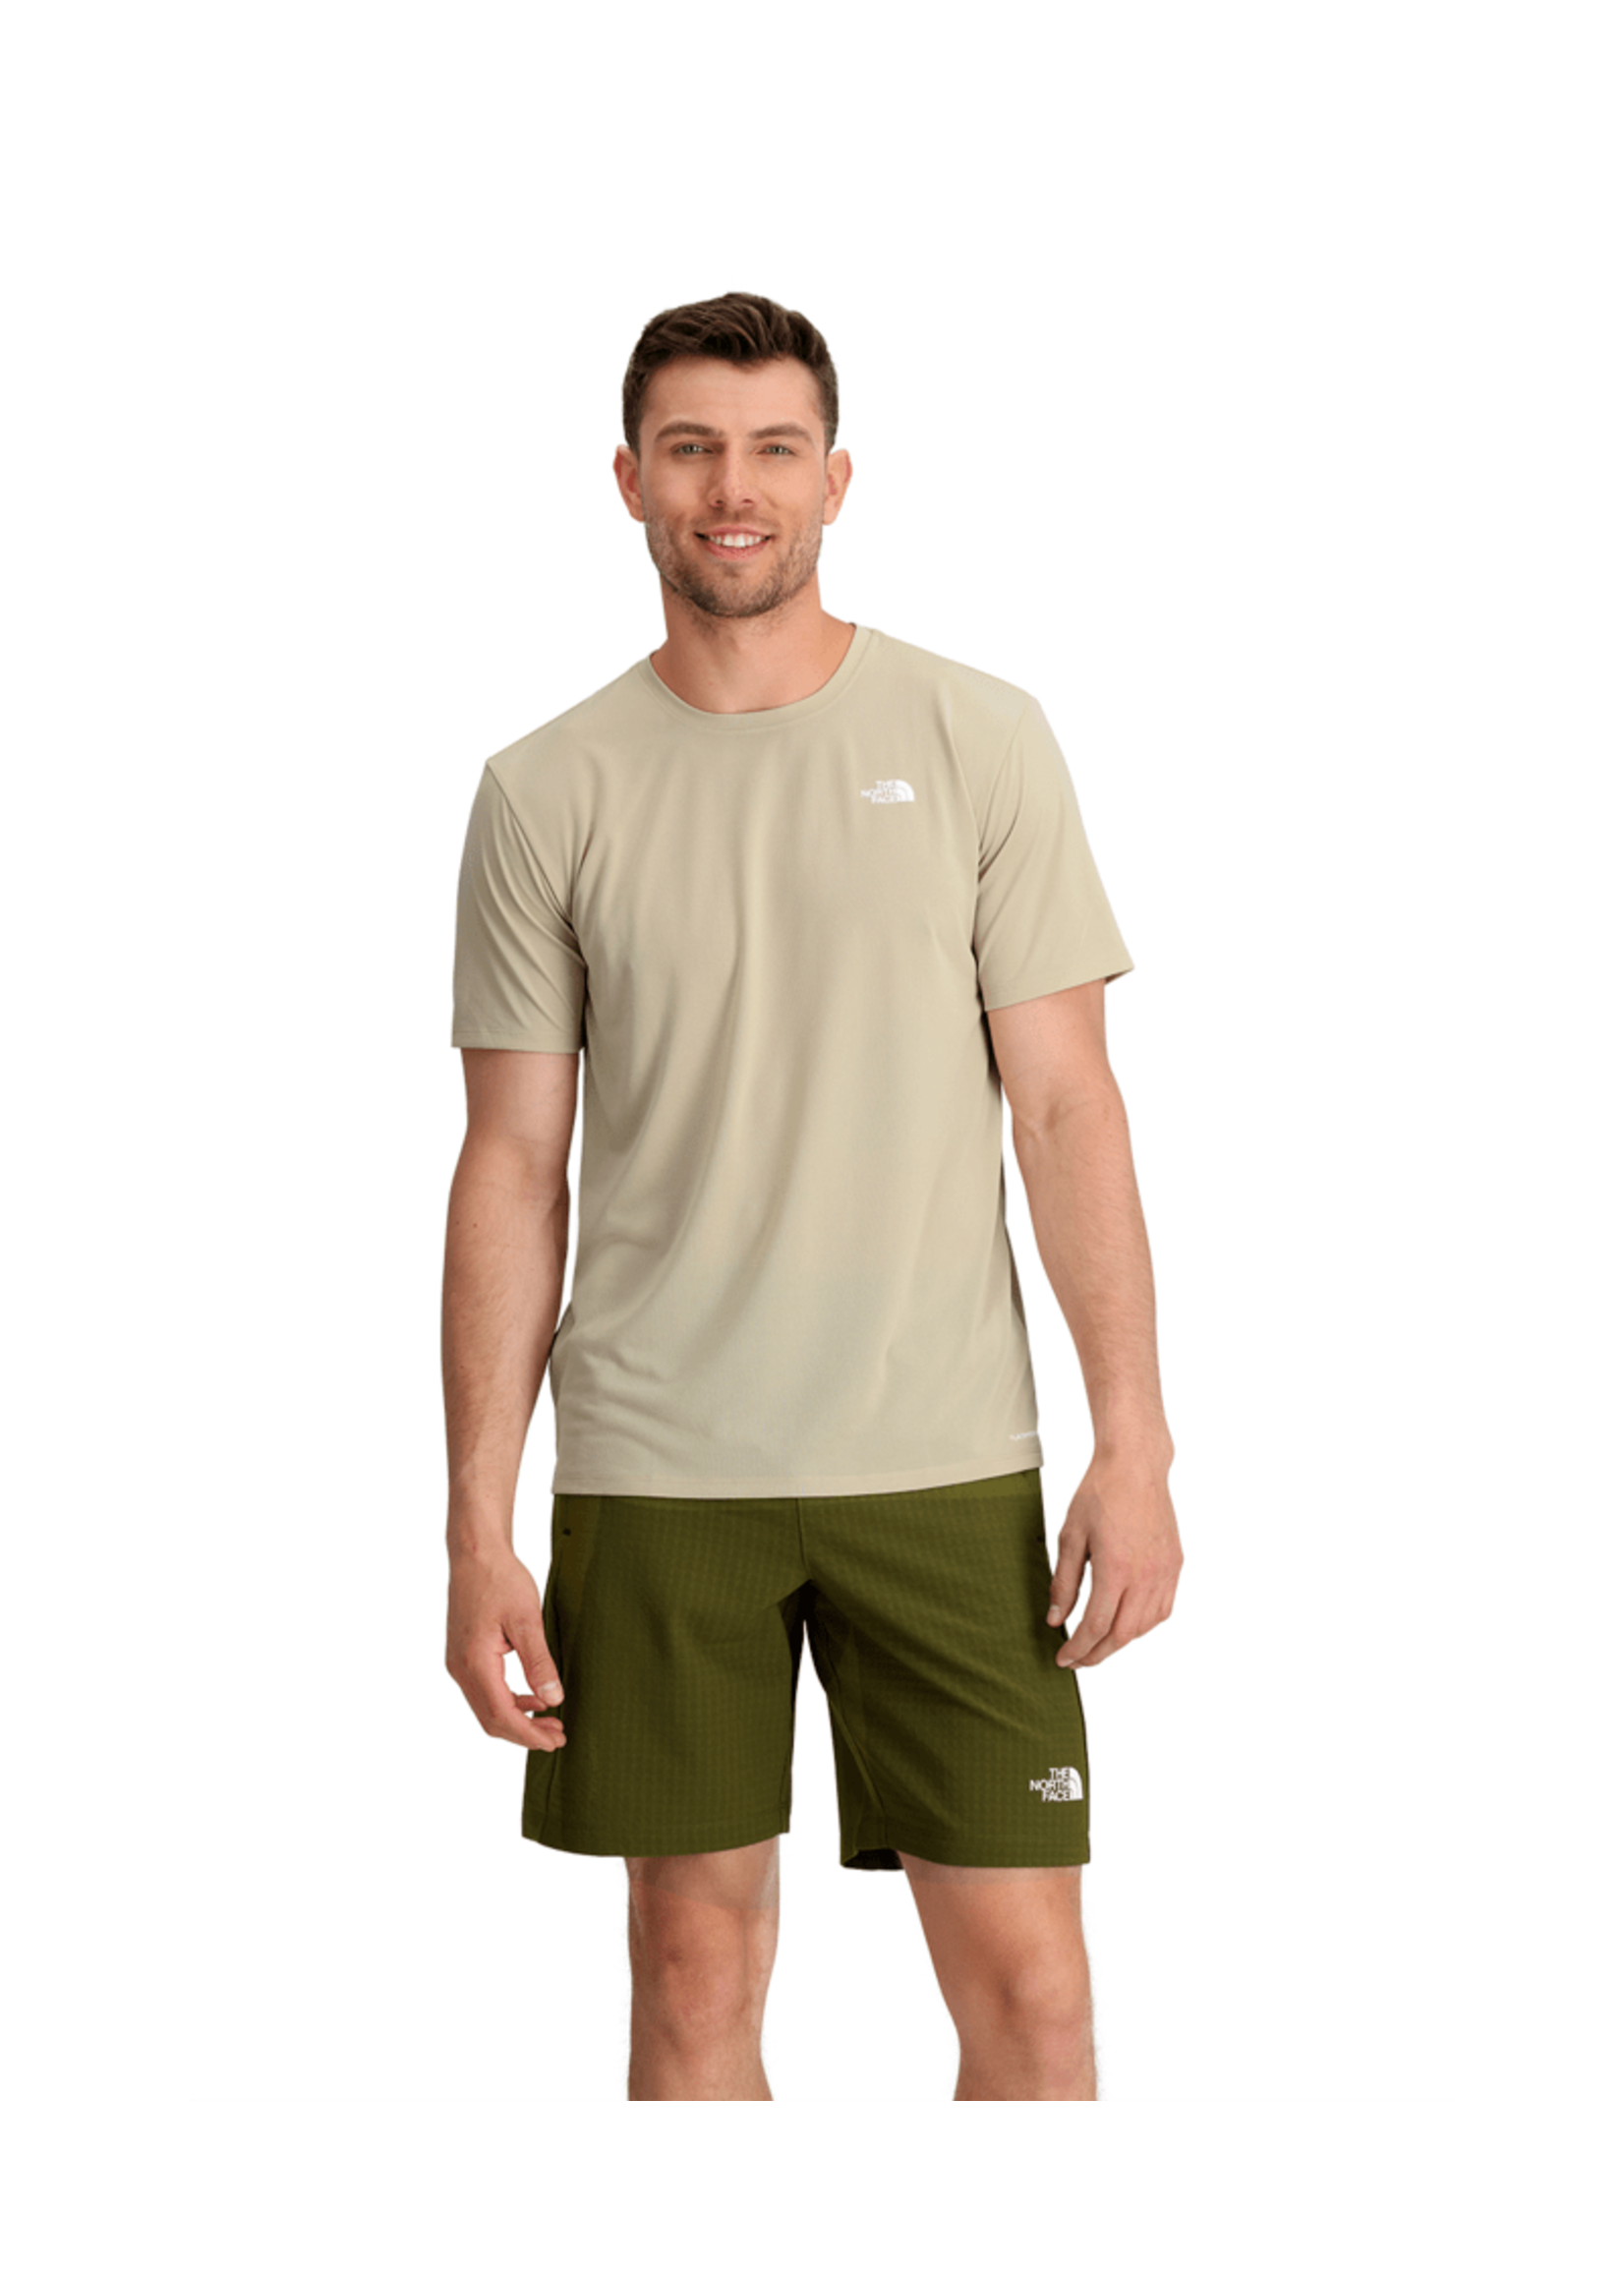 The North Face Men's Elevation Short-Sleeve Tee - Gravel